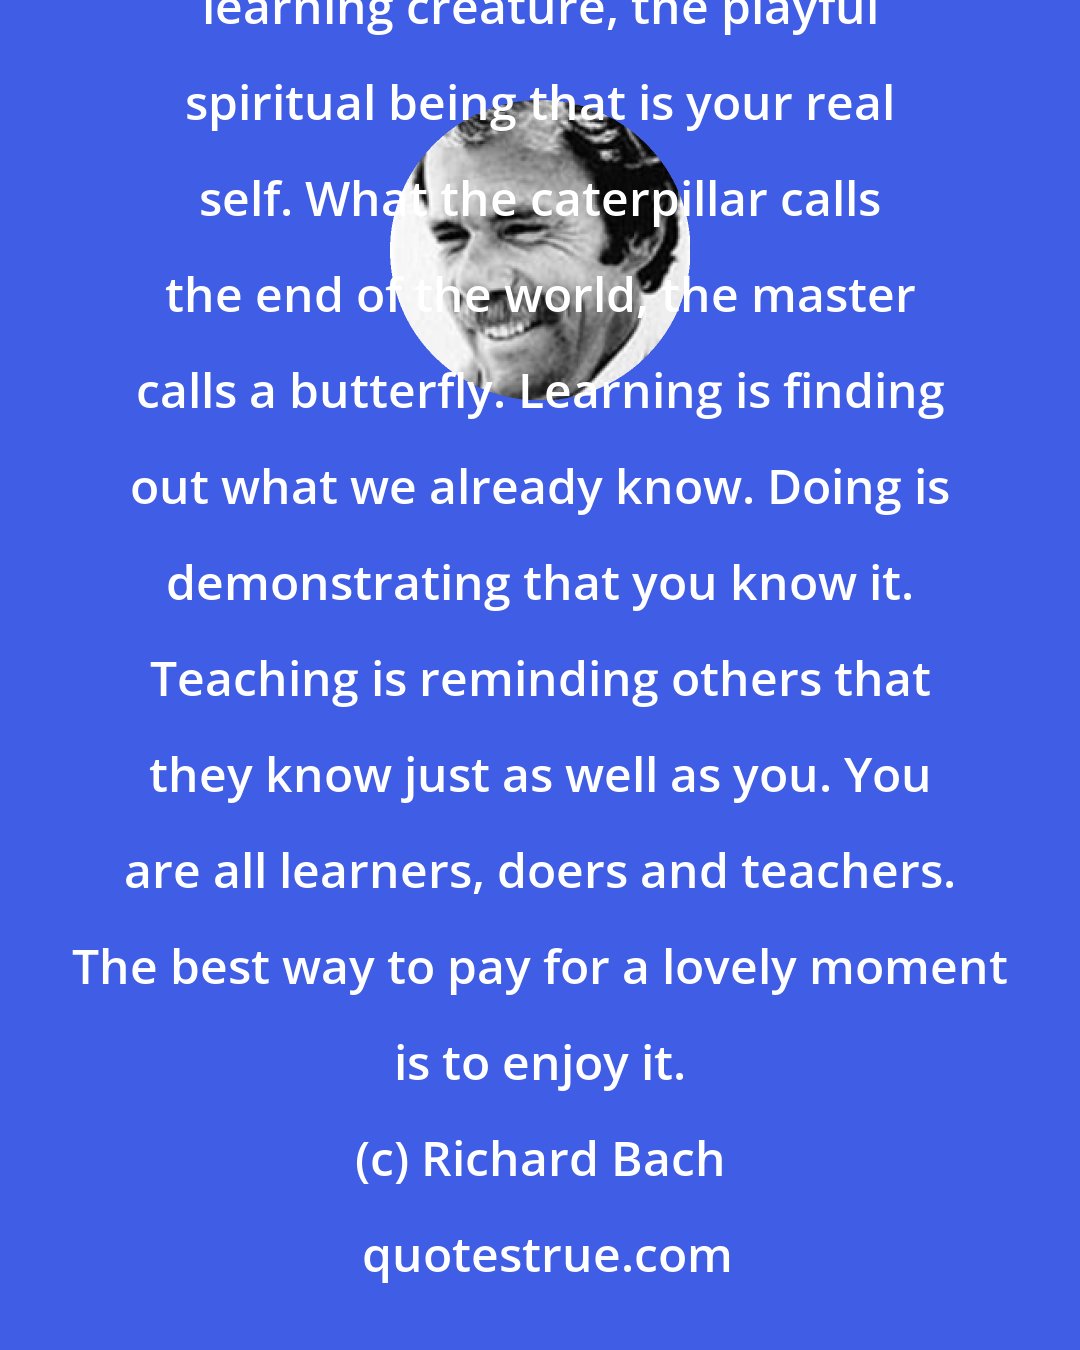 Richard Bach: Not being known doesn't stop the truth from being true. You are led through your lifetime by the inner learning creature, the playful spiritual being that is your real self. What the caterpillar calls the end of the world, the master calls a butterfly. Learning is finding out what we already know. Doing is demonstrating that you know it. Teaching is reminding others that they know just as well as you. You are all learners, doers and teachers. The best way to pay for a lovely moment is to enjoy it.